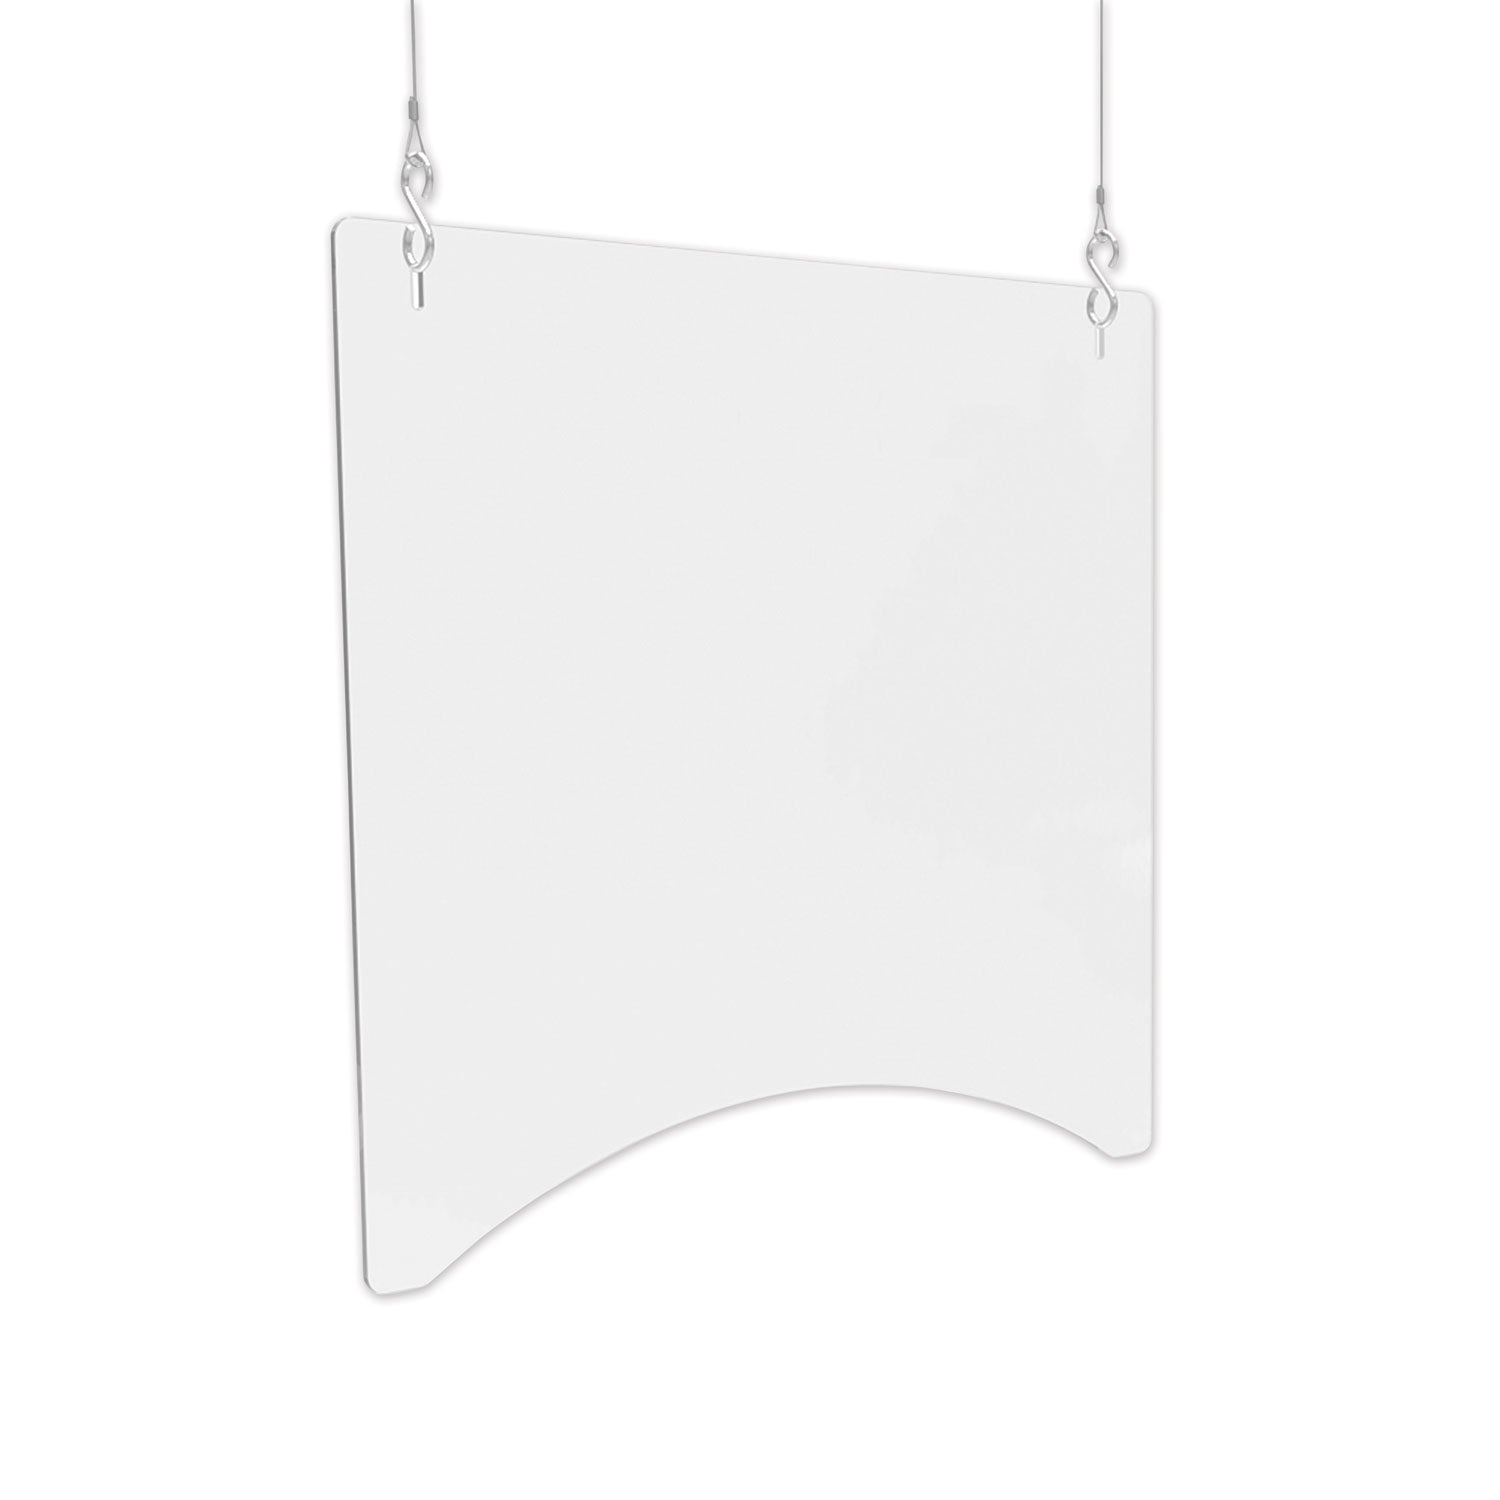 hanging-barrier-2375-x-3575-polycarbonate-clear-2-carton_defpbchpc2436 - 1